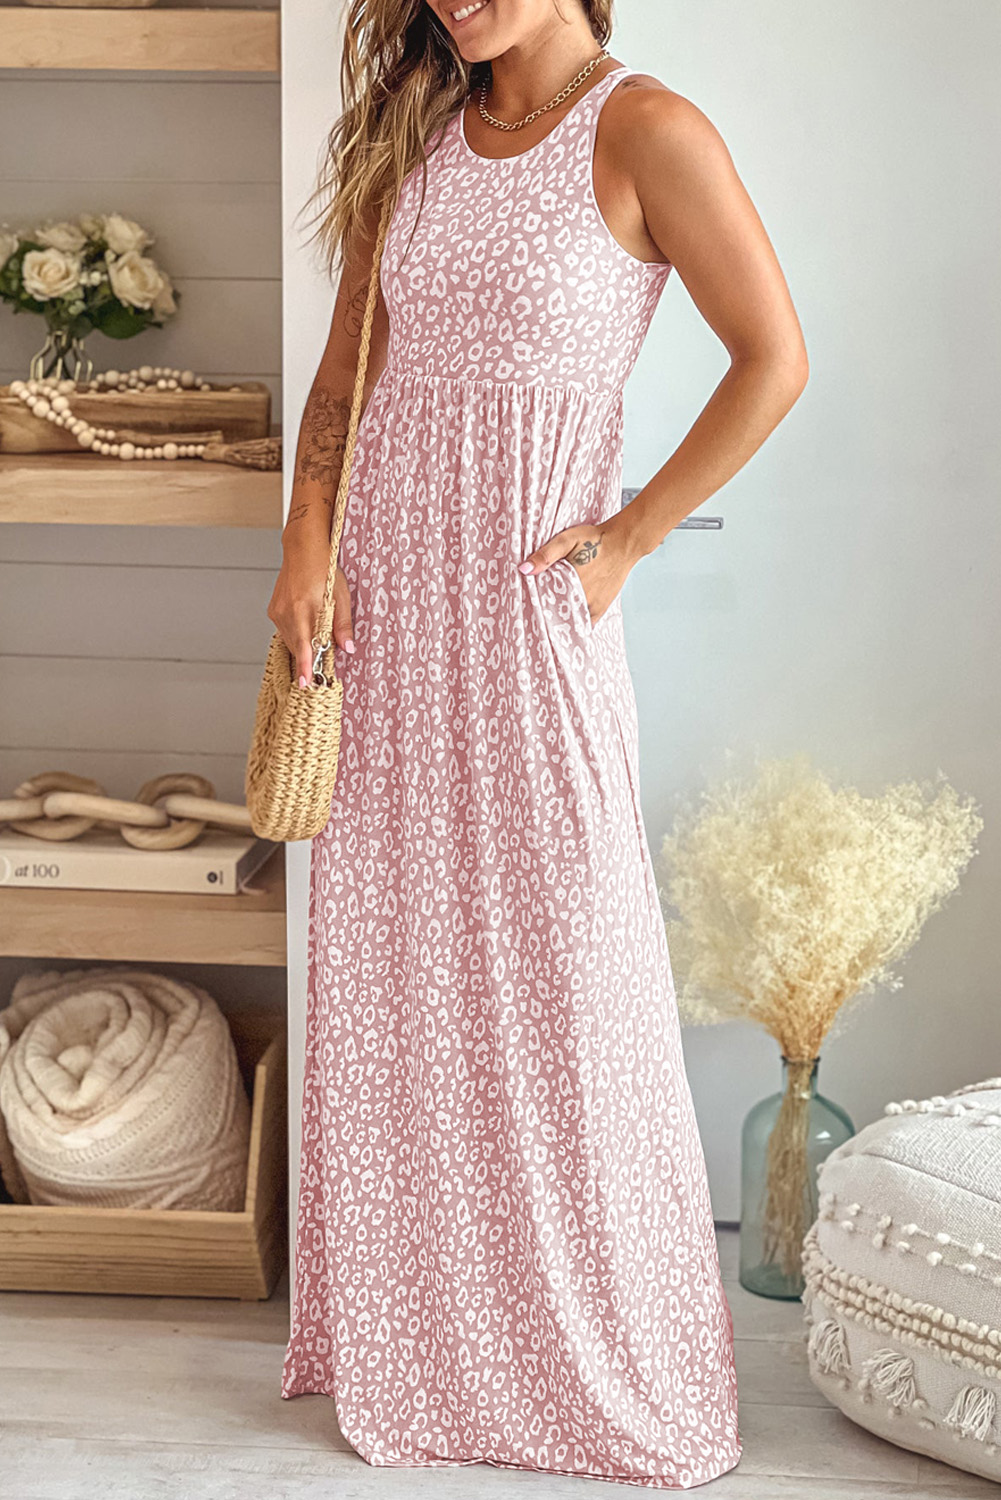 Shewin Wholesale SUMMER Pink Sleeveless Floor Length Leopard Print DRESS with Pockets